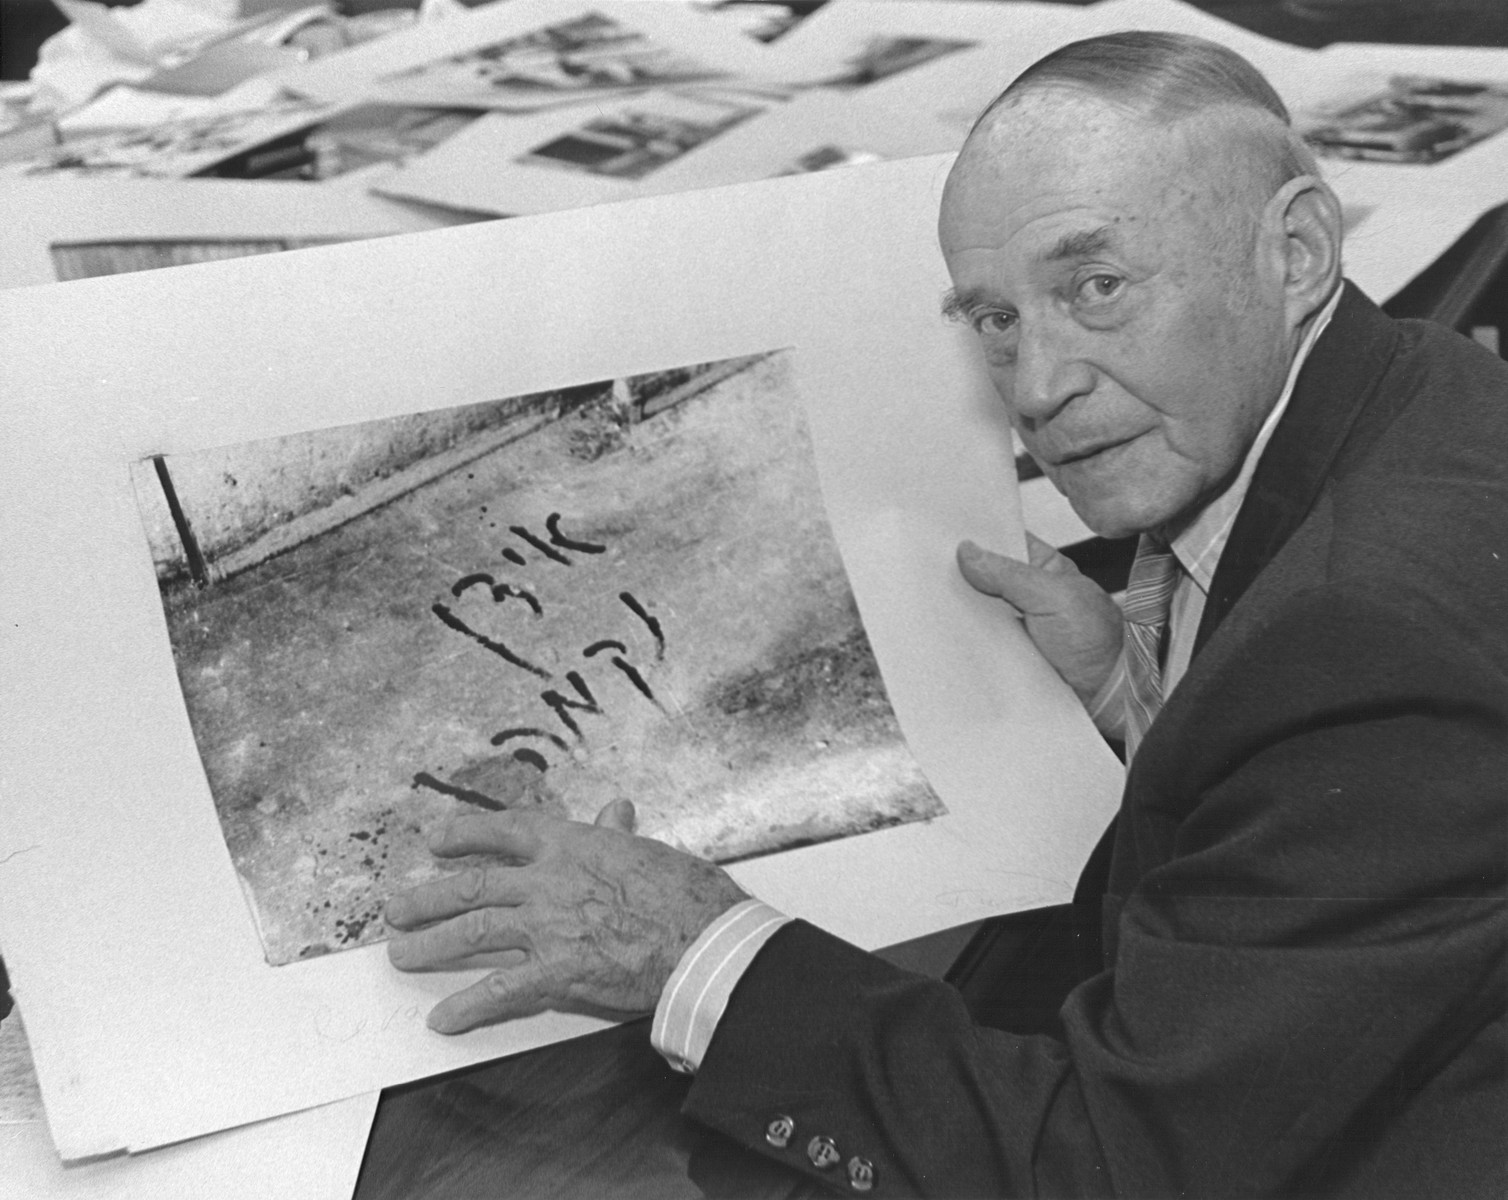 Portrait of George Kadish (formerly Zvi Kadushi), posing with a photograph he took of an inscription written by a Jew during the pogrom in the Slobodka district of Kovno in July 1941.  The Yiddish inscription reads: "Jews, avenge", and was supposedly written in blood by the victim.